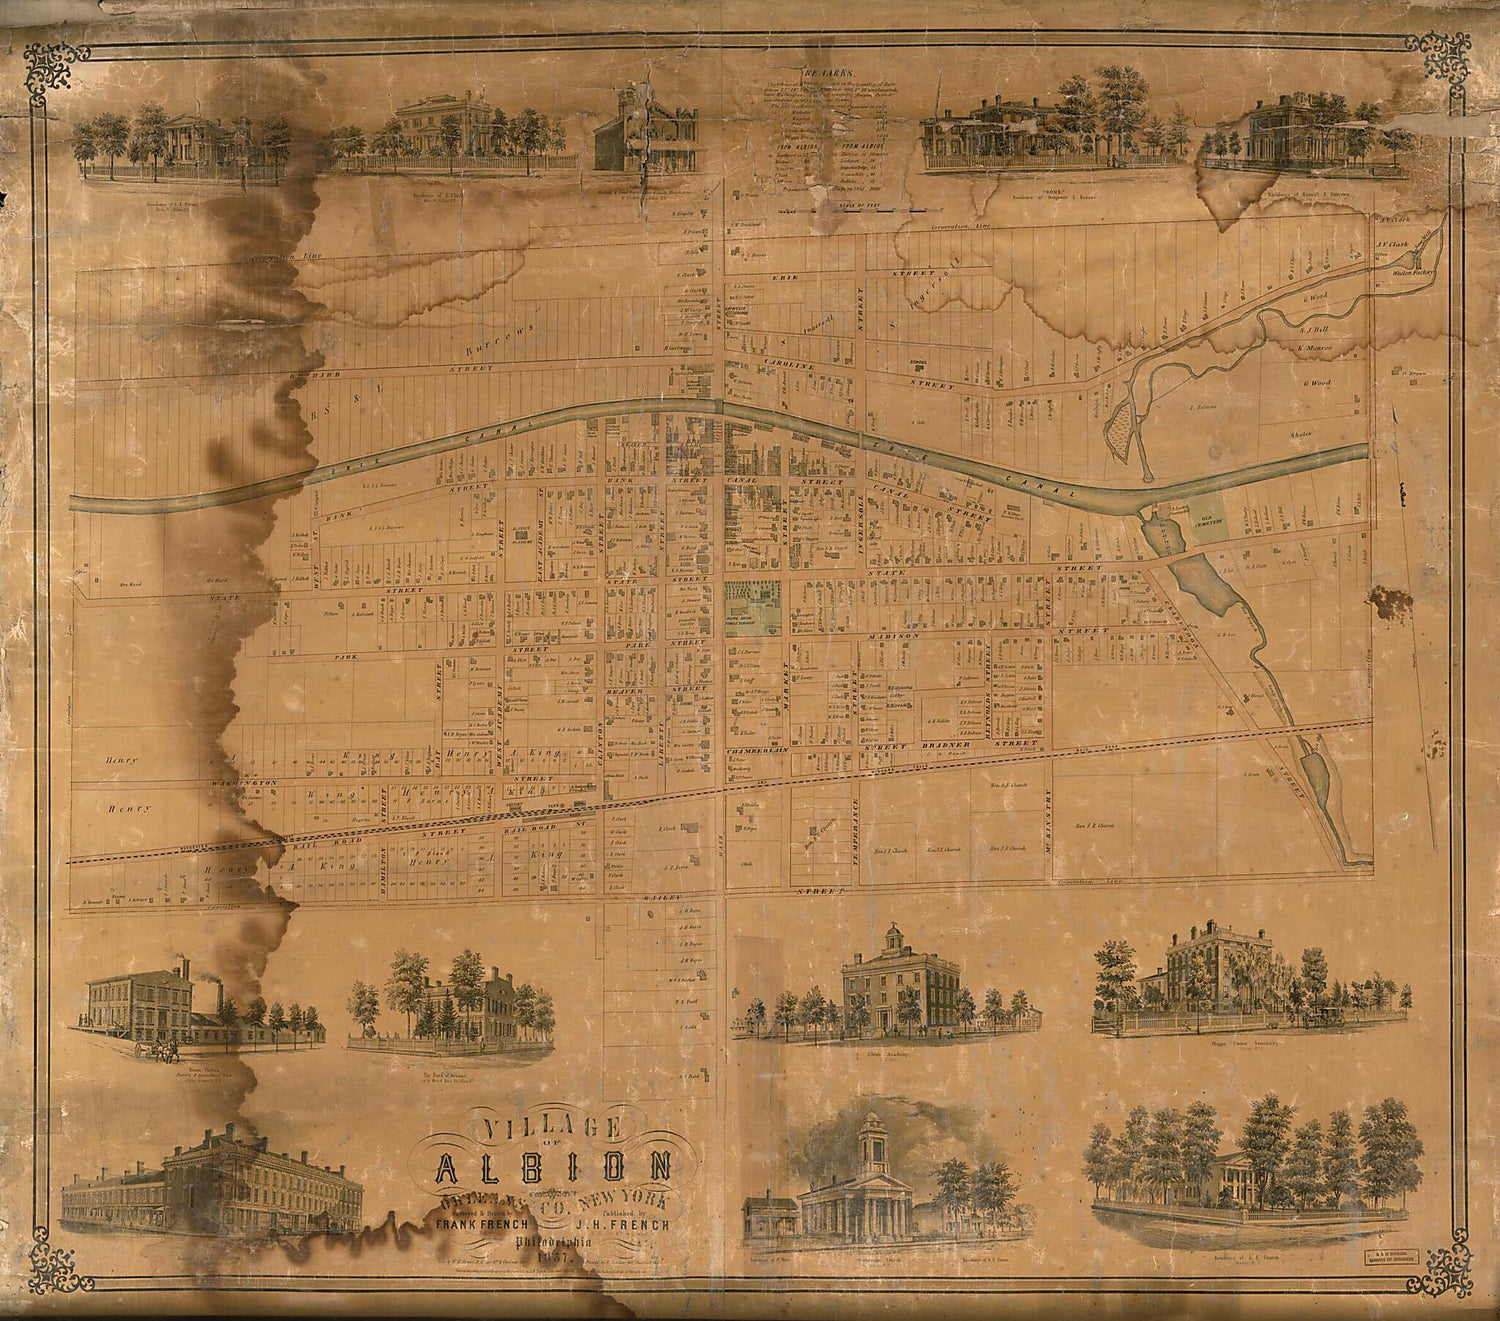 This old map of Village of Albion, Orleans County, New York (Village of Albion, Orleans County, New York) from 1857 was created by Frank F. French, J. H. (John Homer) French, W. H. Rease in 1857